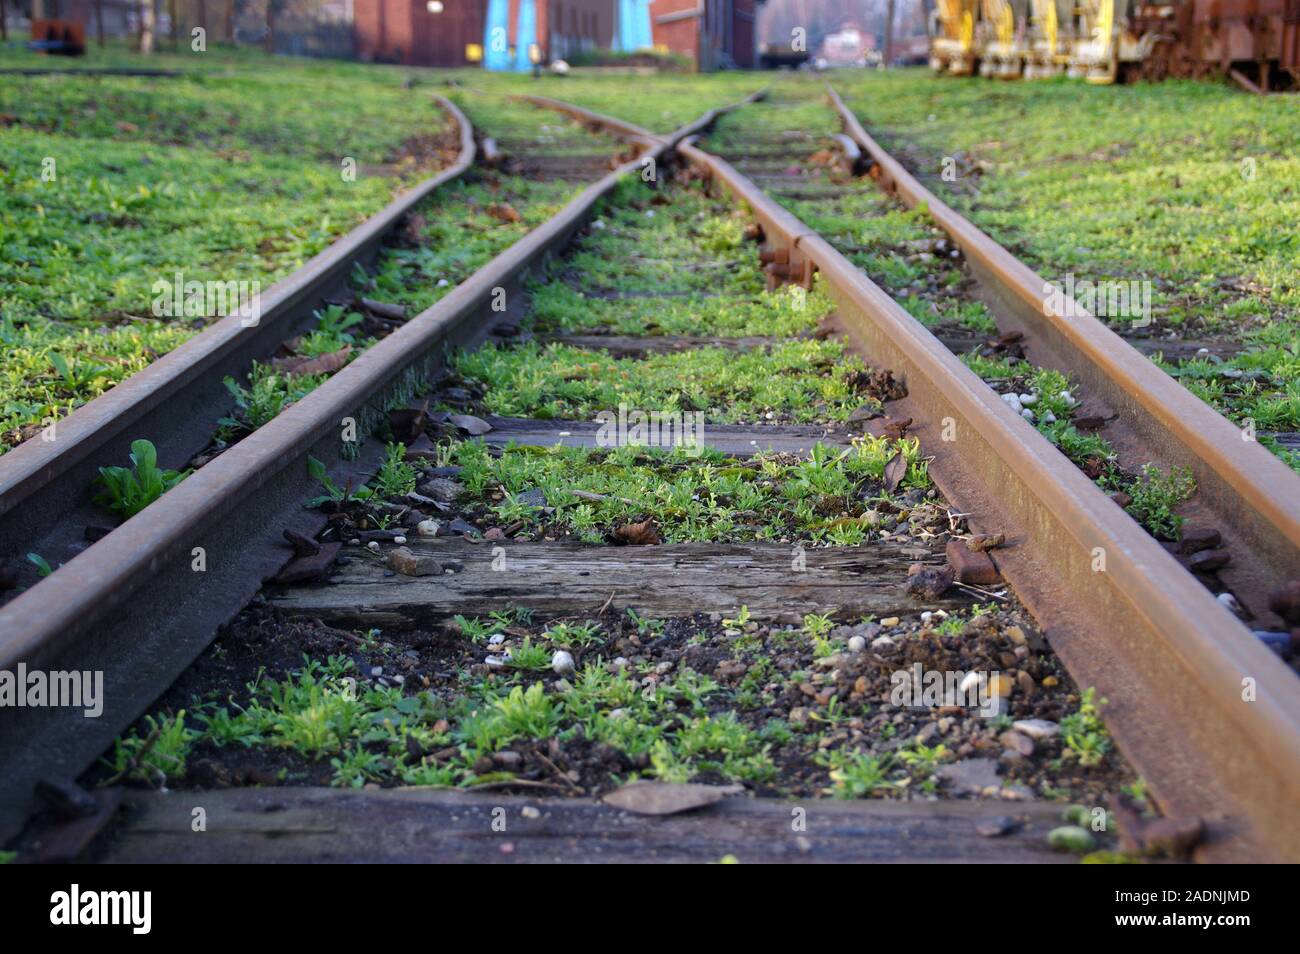 Old railroad switch. Directions of train road. A dilemma metaphor. Stock Photo